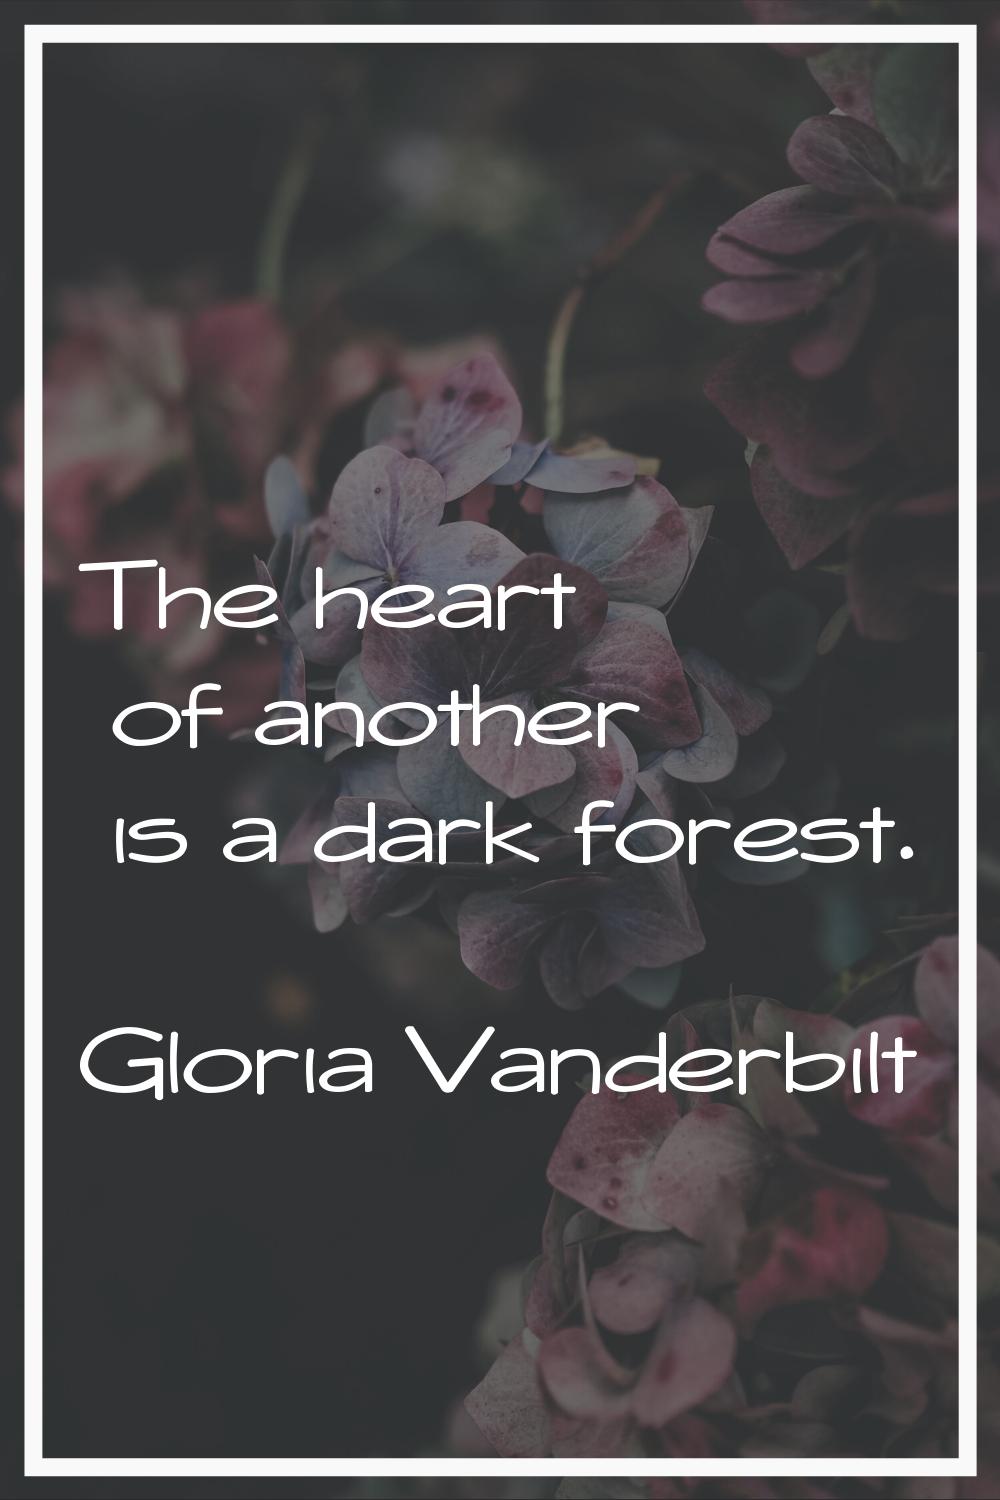 The heart of another is a dark forest.